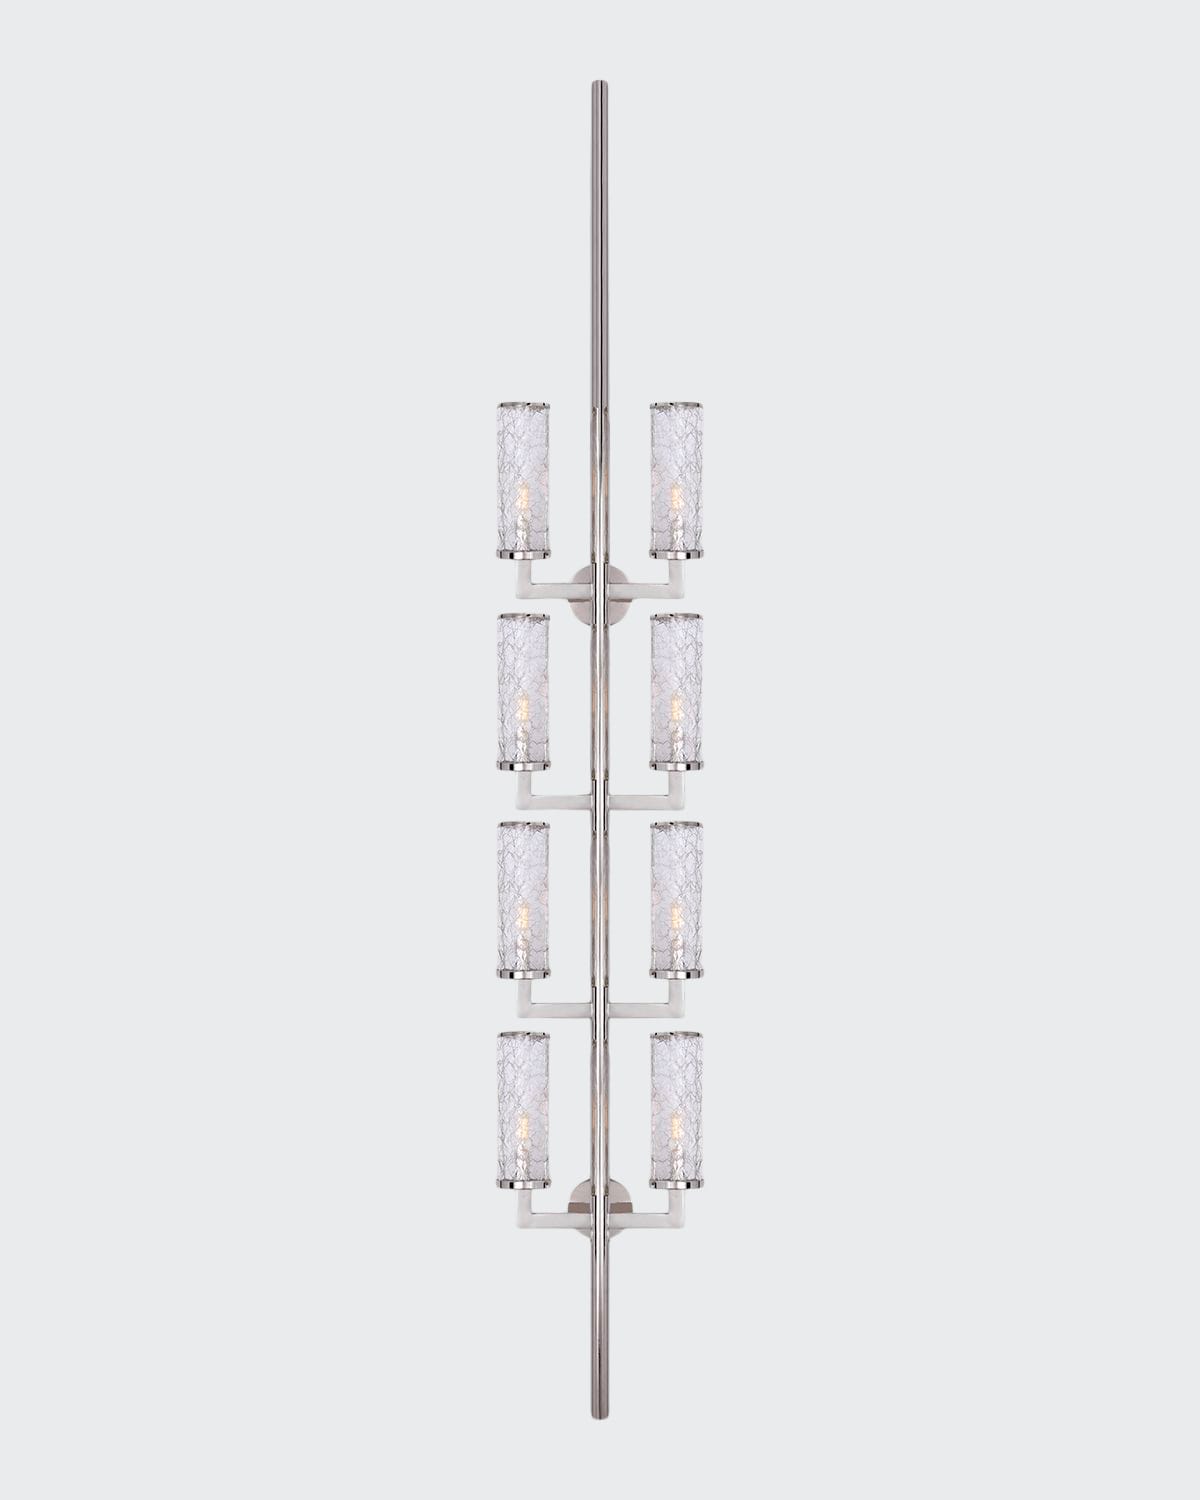 Kelly Wearstler For Visual Comfort Signature Liaison Statement Sconce In Polished Nickel